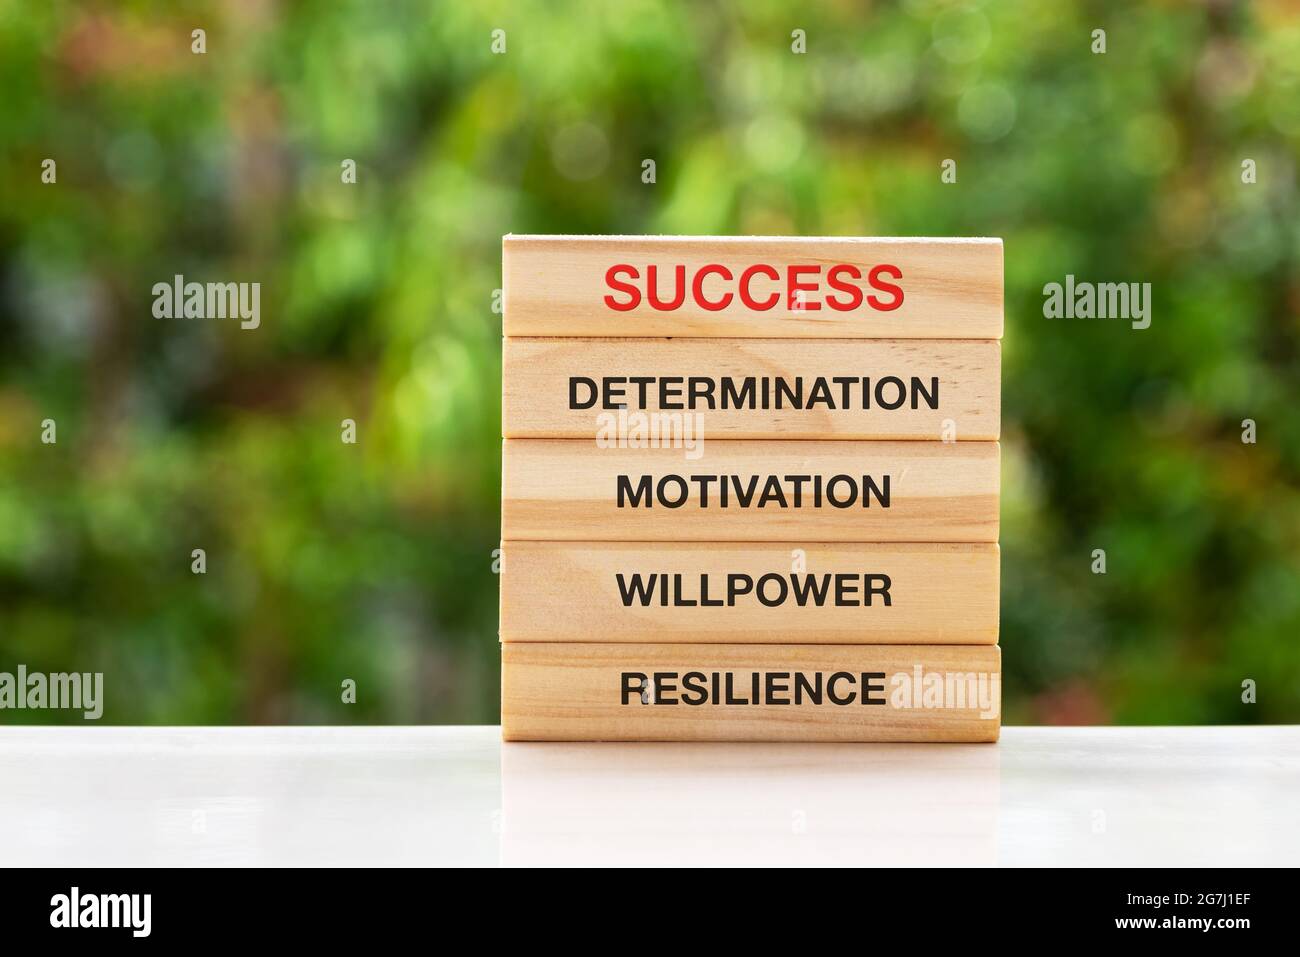 Success, determination, motivation, willpower, resilience text on wood block Stock Photo